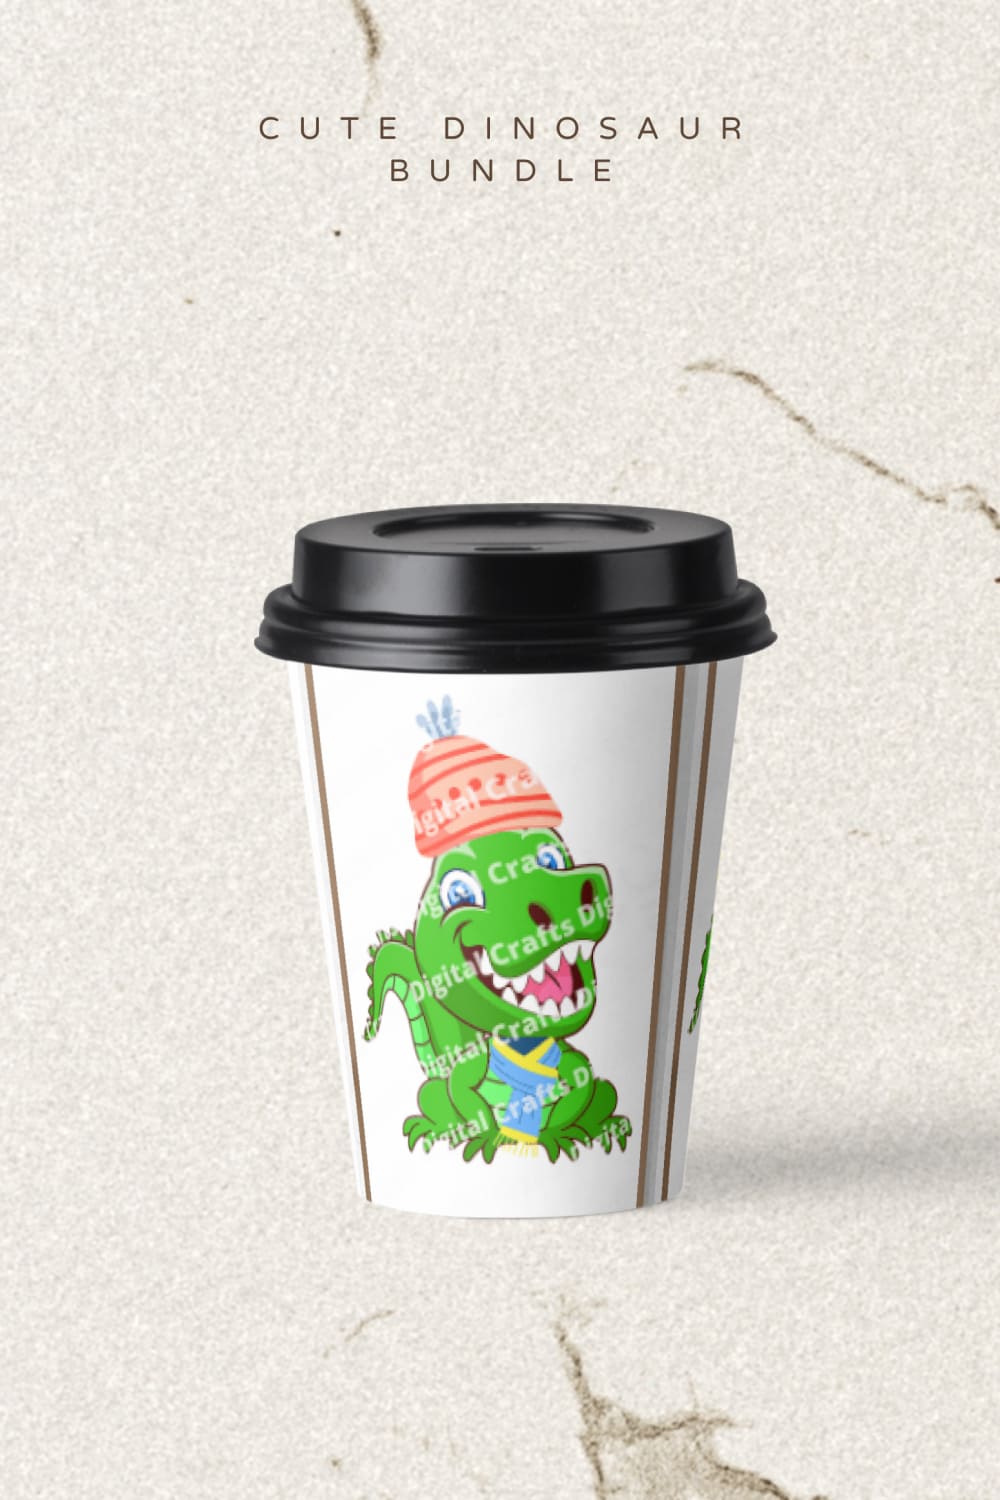 Image of a paper cup with a picture of a green dinosaur.